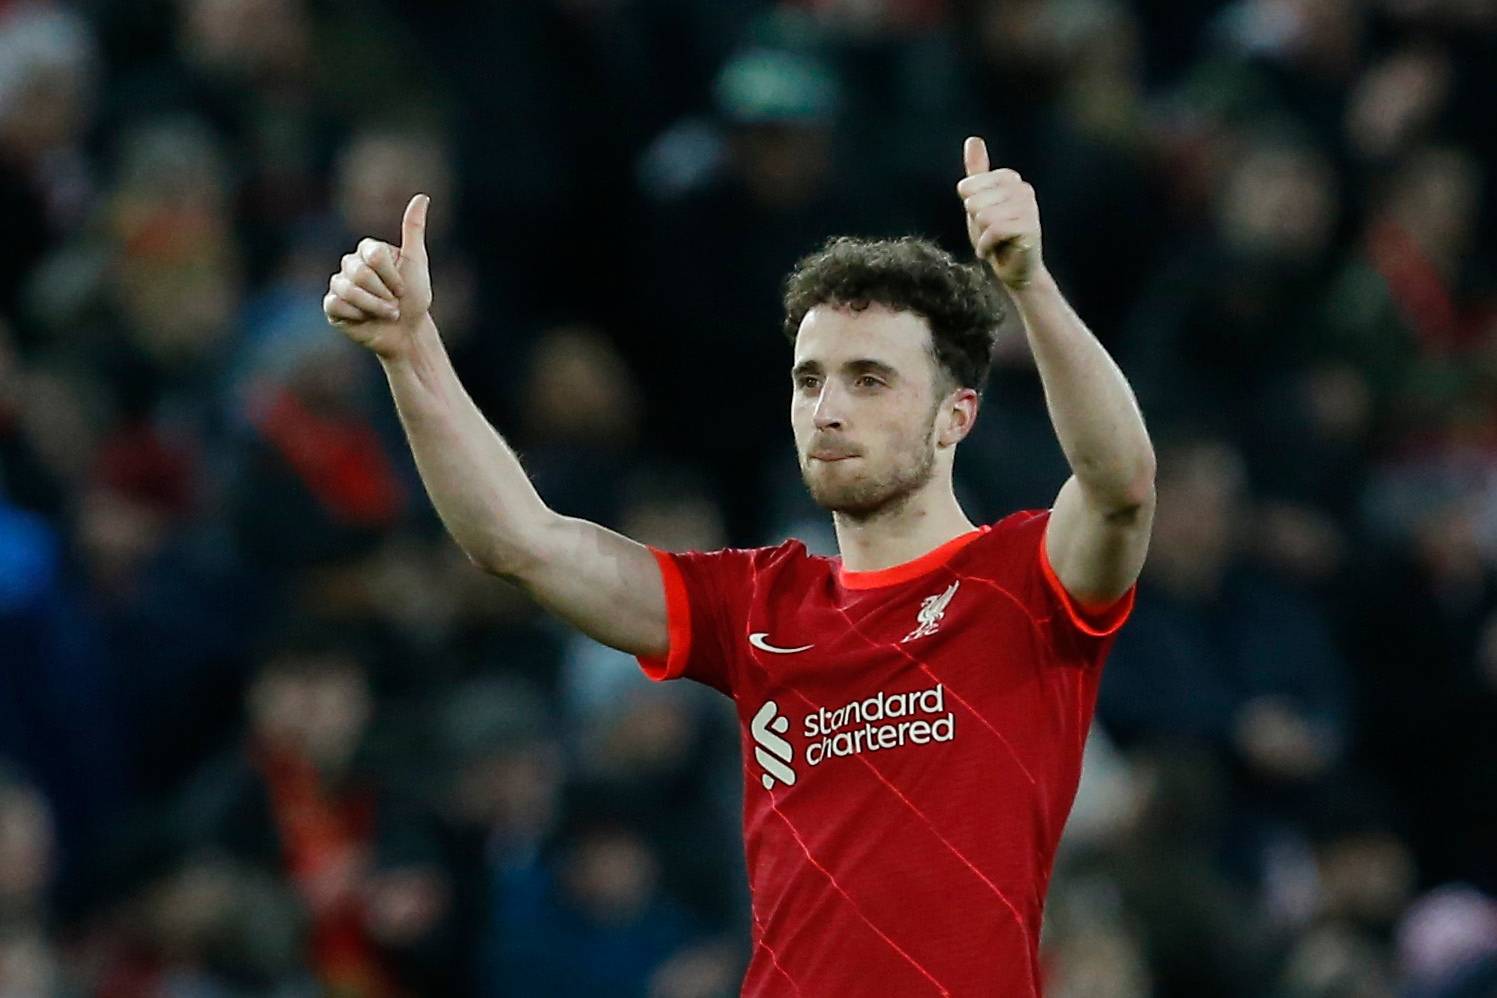 Liverpool: Diogo Jota back in full training next week - Liverpool News